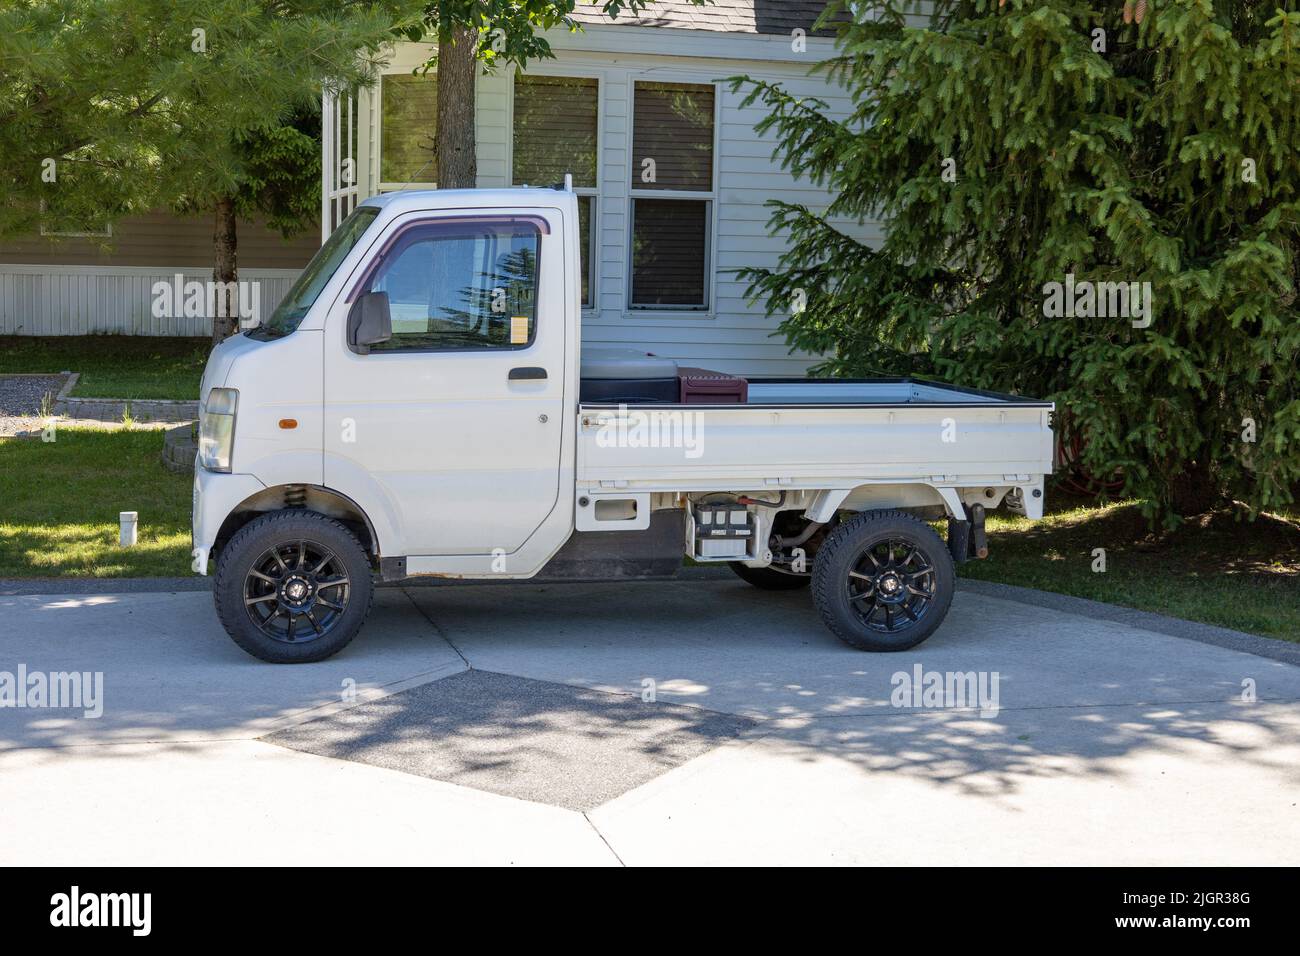 Japanese Carry Micro Suzuki Pick Up Truck Right Hand Drive, Parked In Ontario Canada Stock Photo